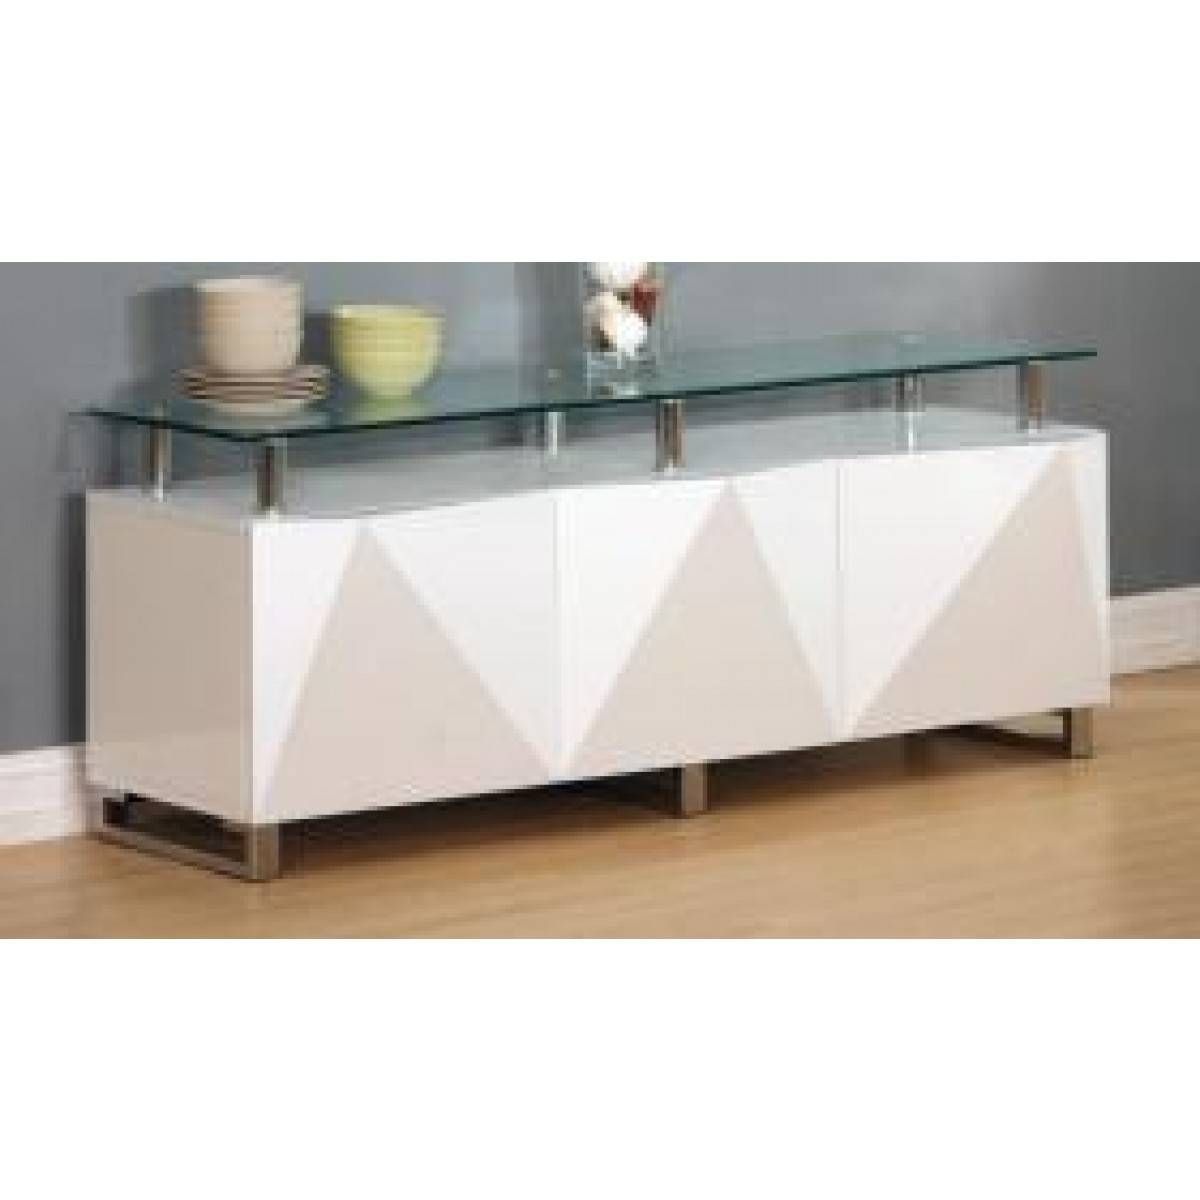 Rowley White High Gloss Sideboard 3 Doors – Sideboards And With Regard To White High Gloss Sideboards (View 13 of 30)